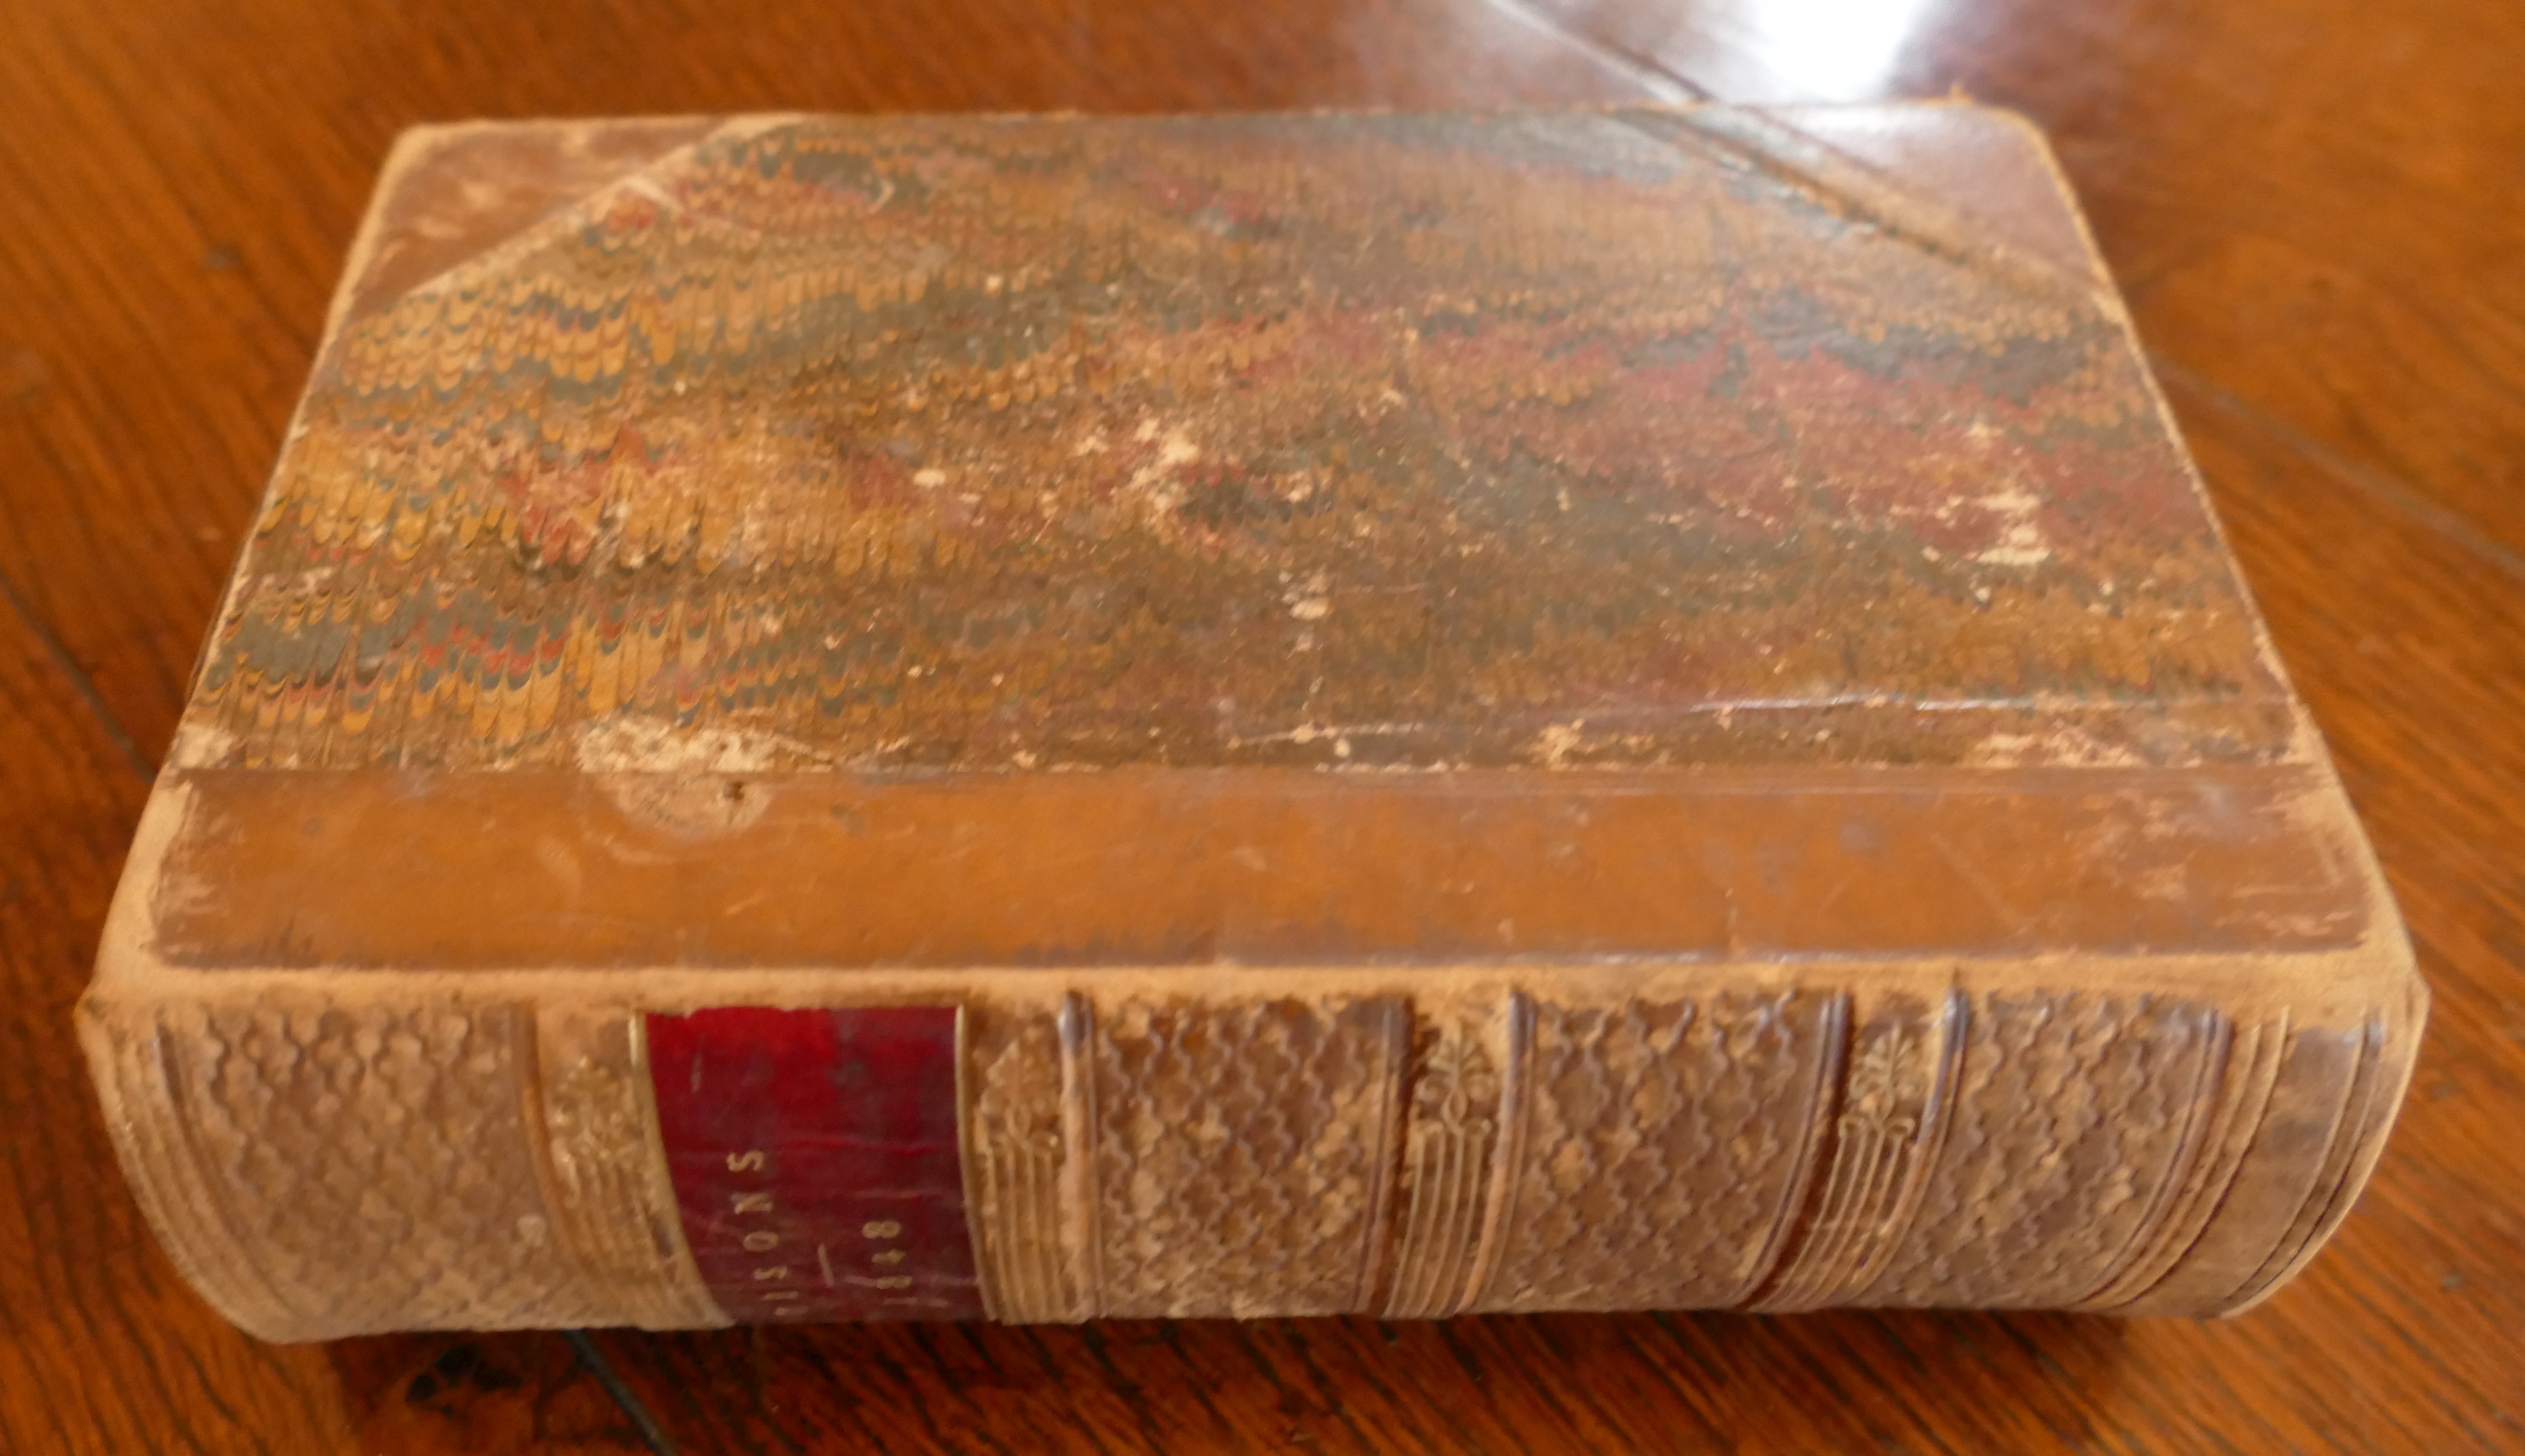 TAYLOR, Alfred S, On Poisons in Relation to Medical Jurisprudence, London 1848, first edition,